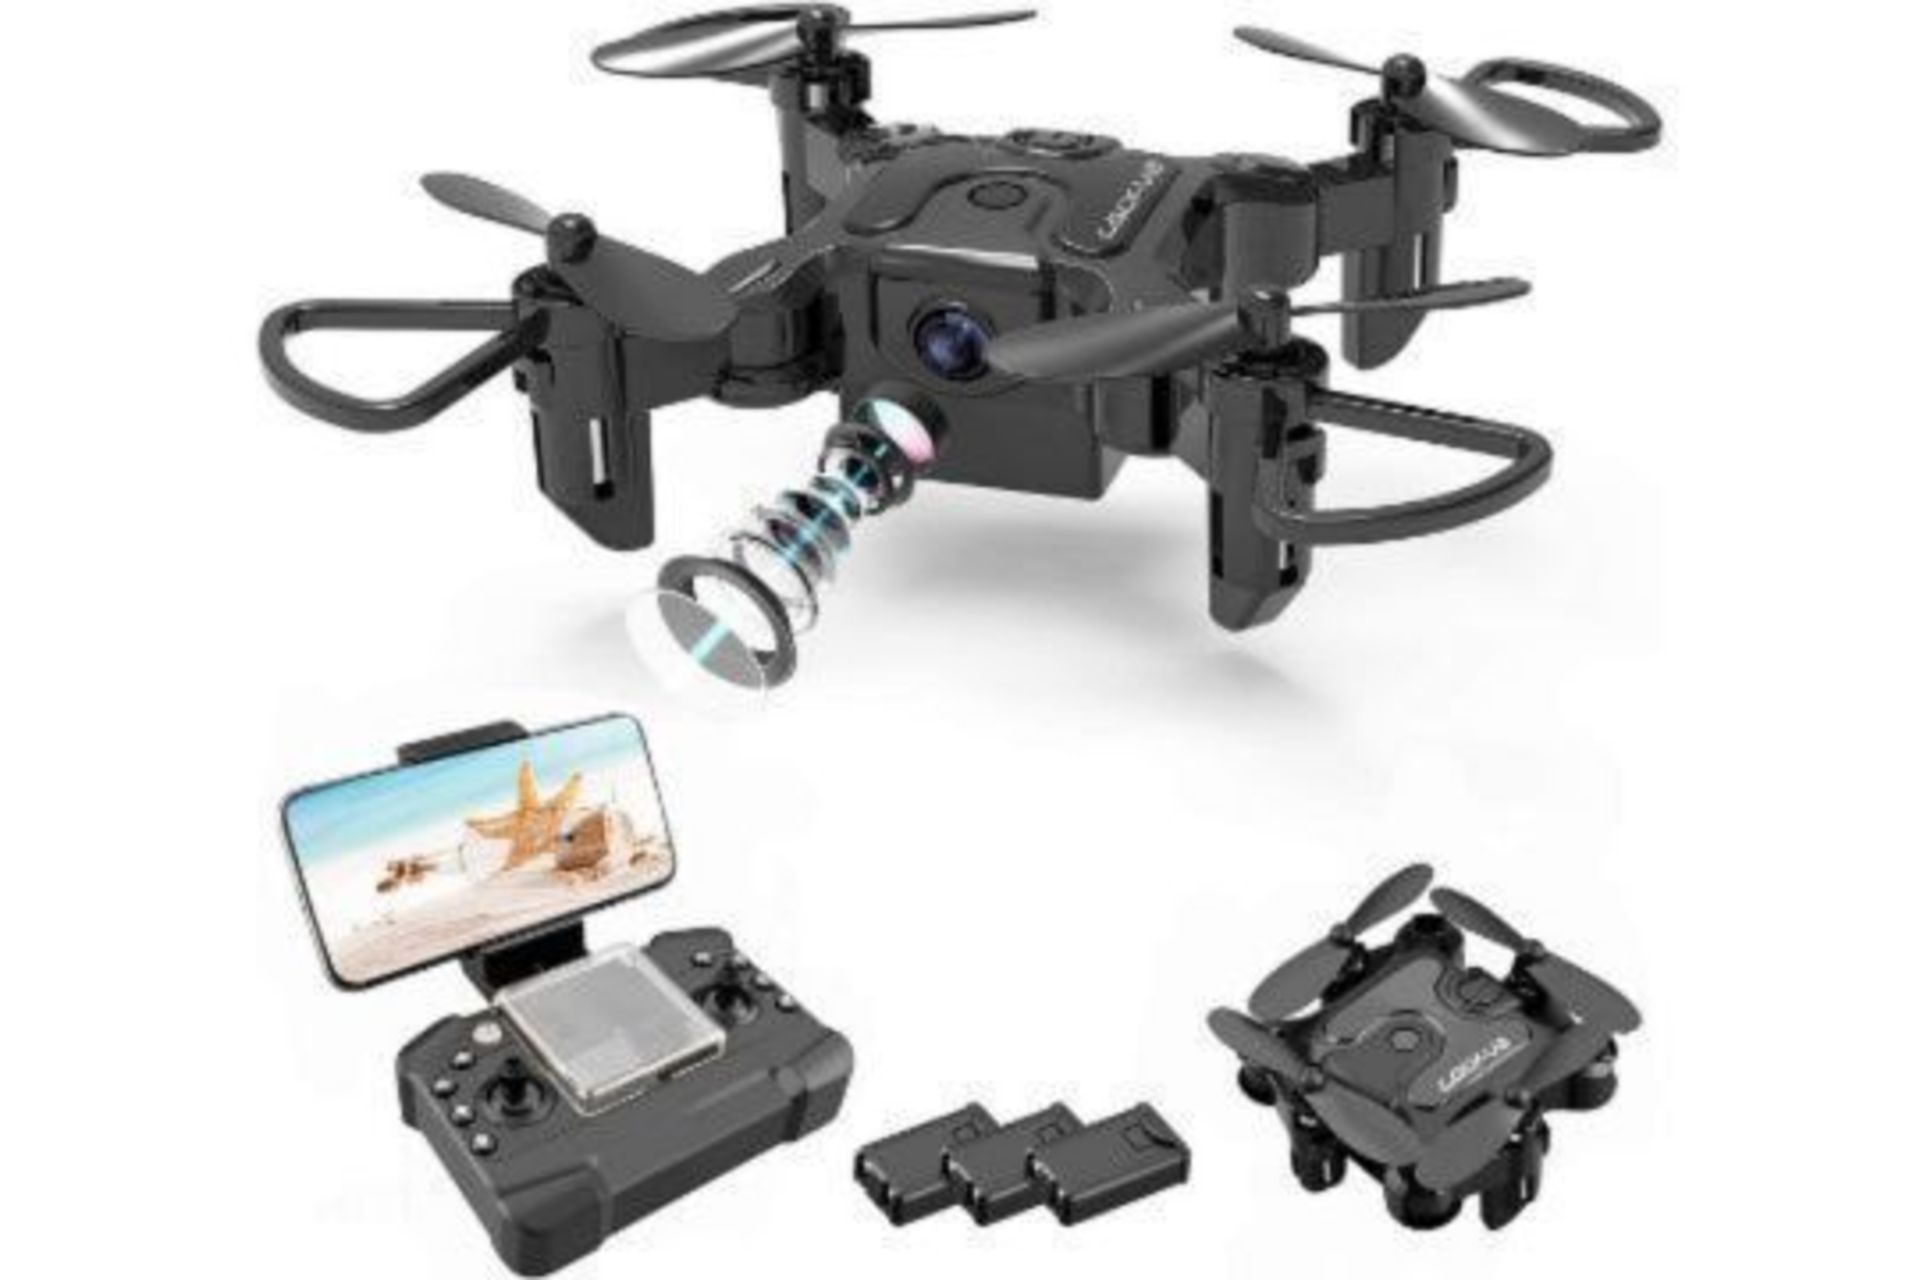 TRADE LOT 10 x Boxed 4D-V2 Mini Drone (row4). ?HD Pictures and Live Videos?:V2 equipped with 720P HD